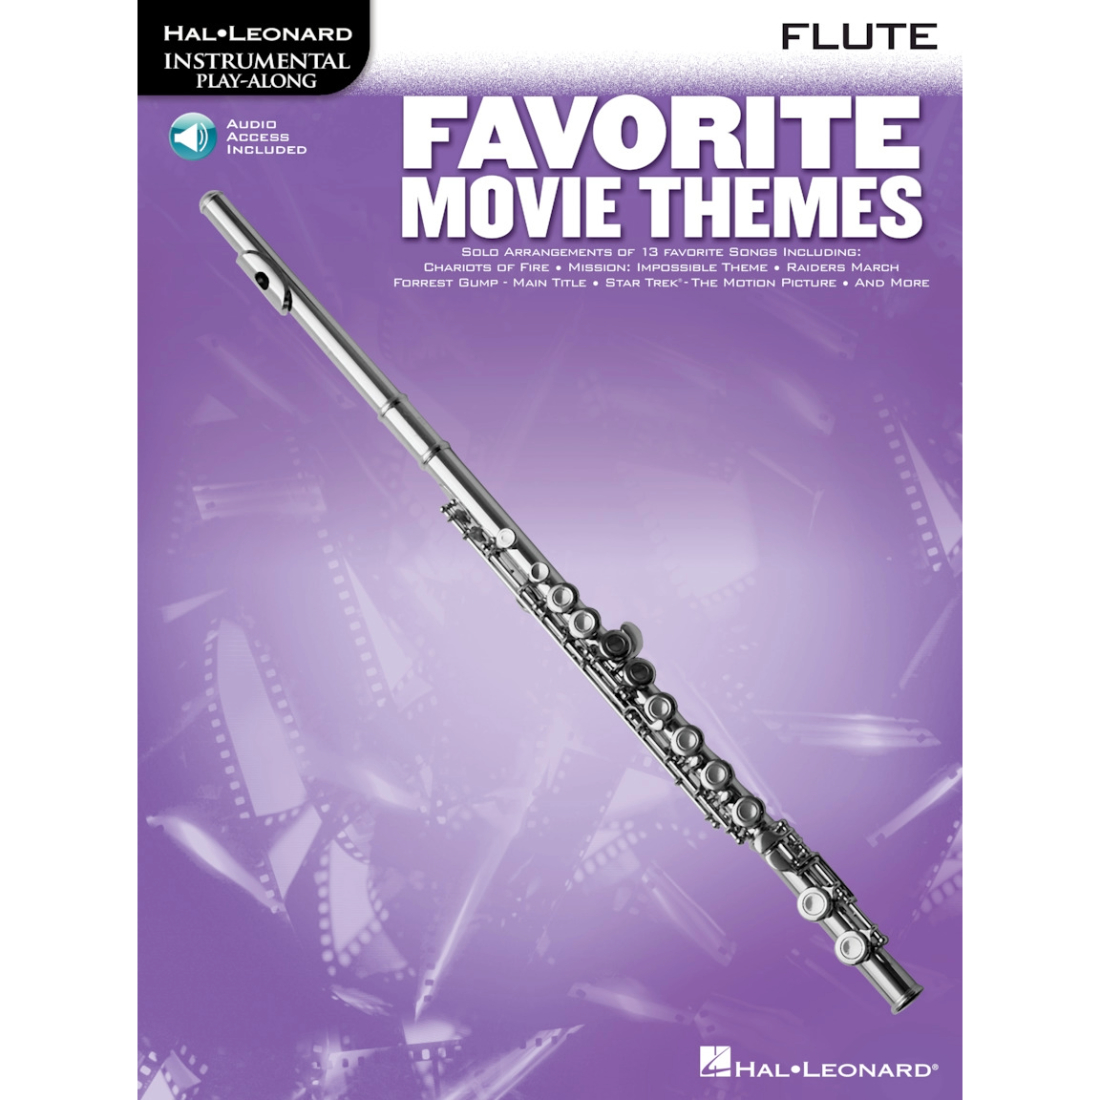 Purple cover with a flute on it, titled favorite movie songs